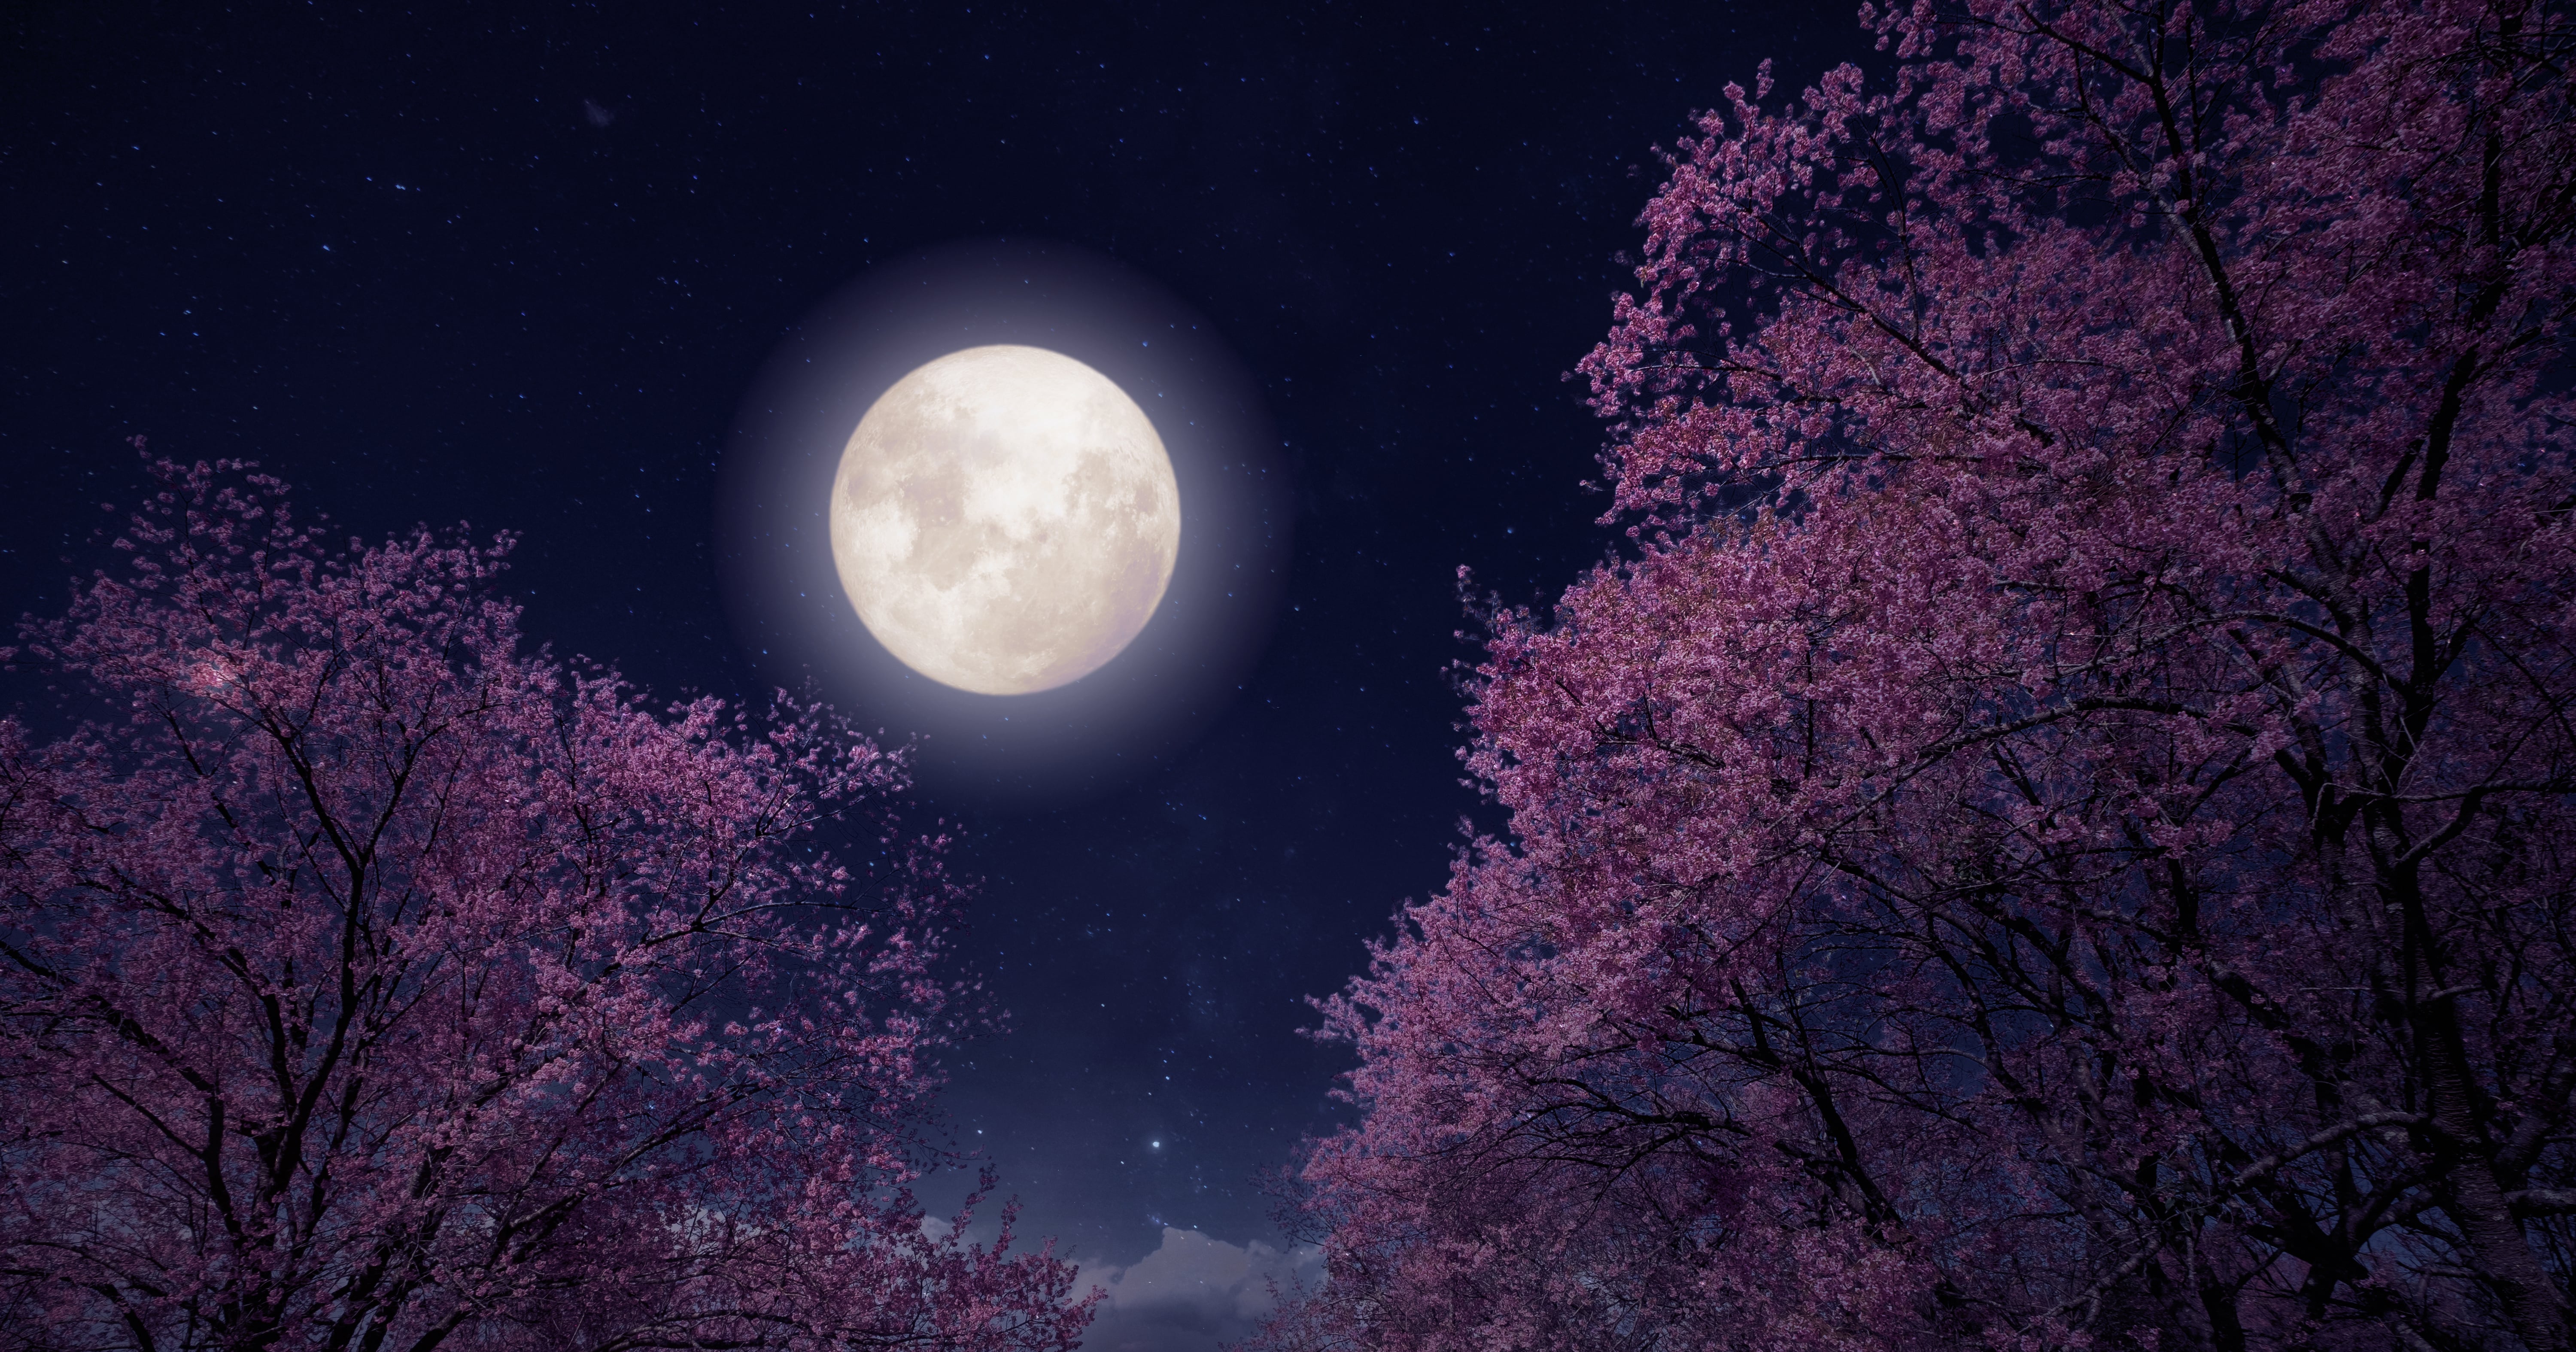 The Spiritual Meaning Behind May's Flower Moon, According to an Astrologer